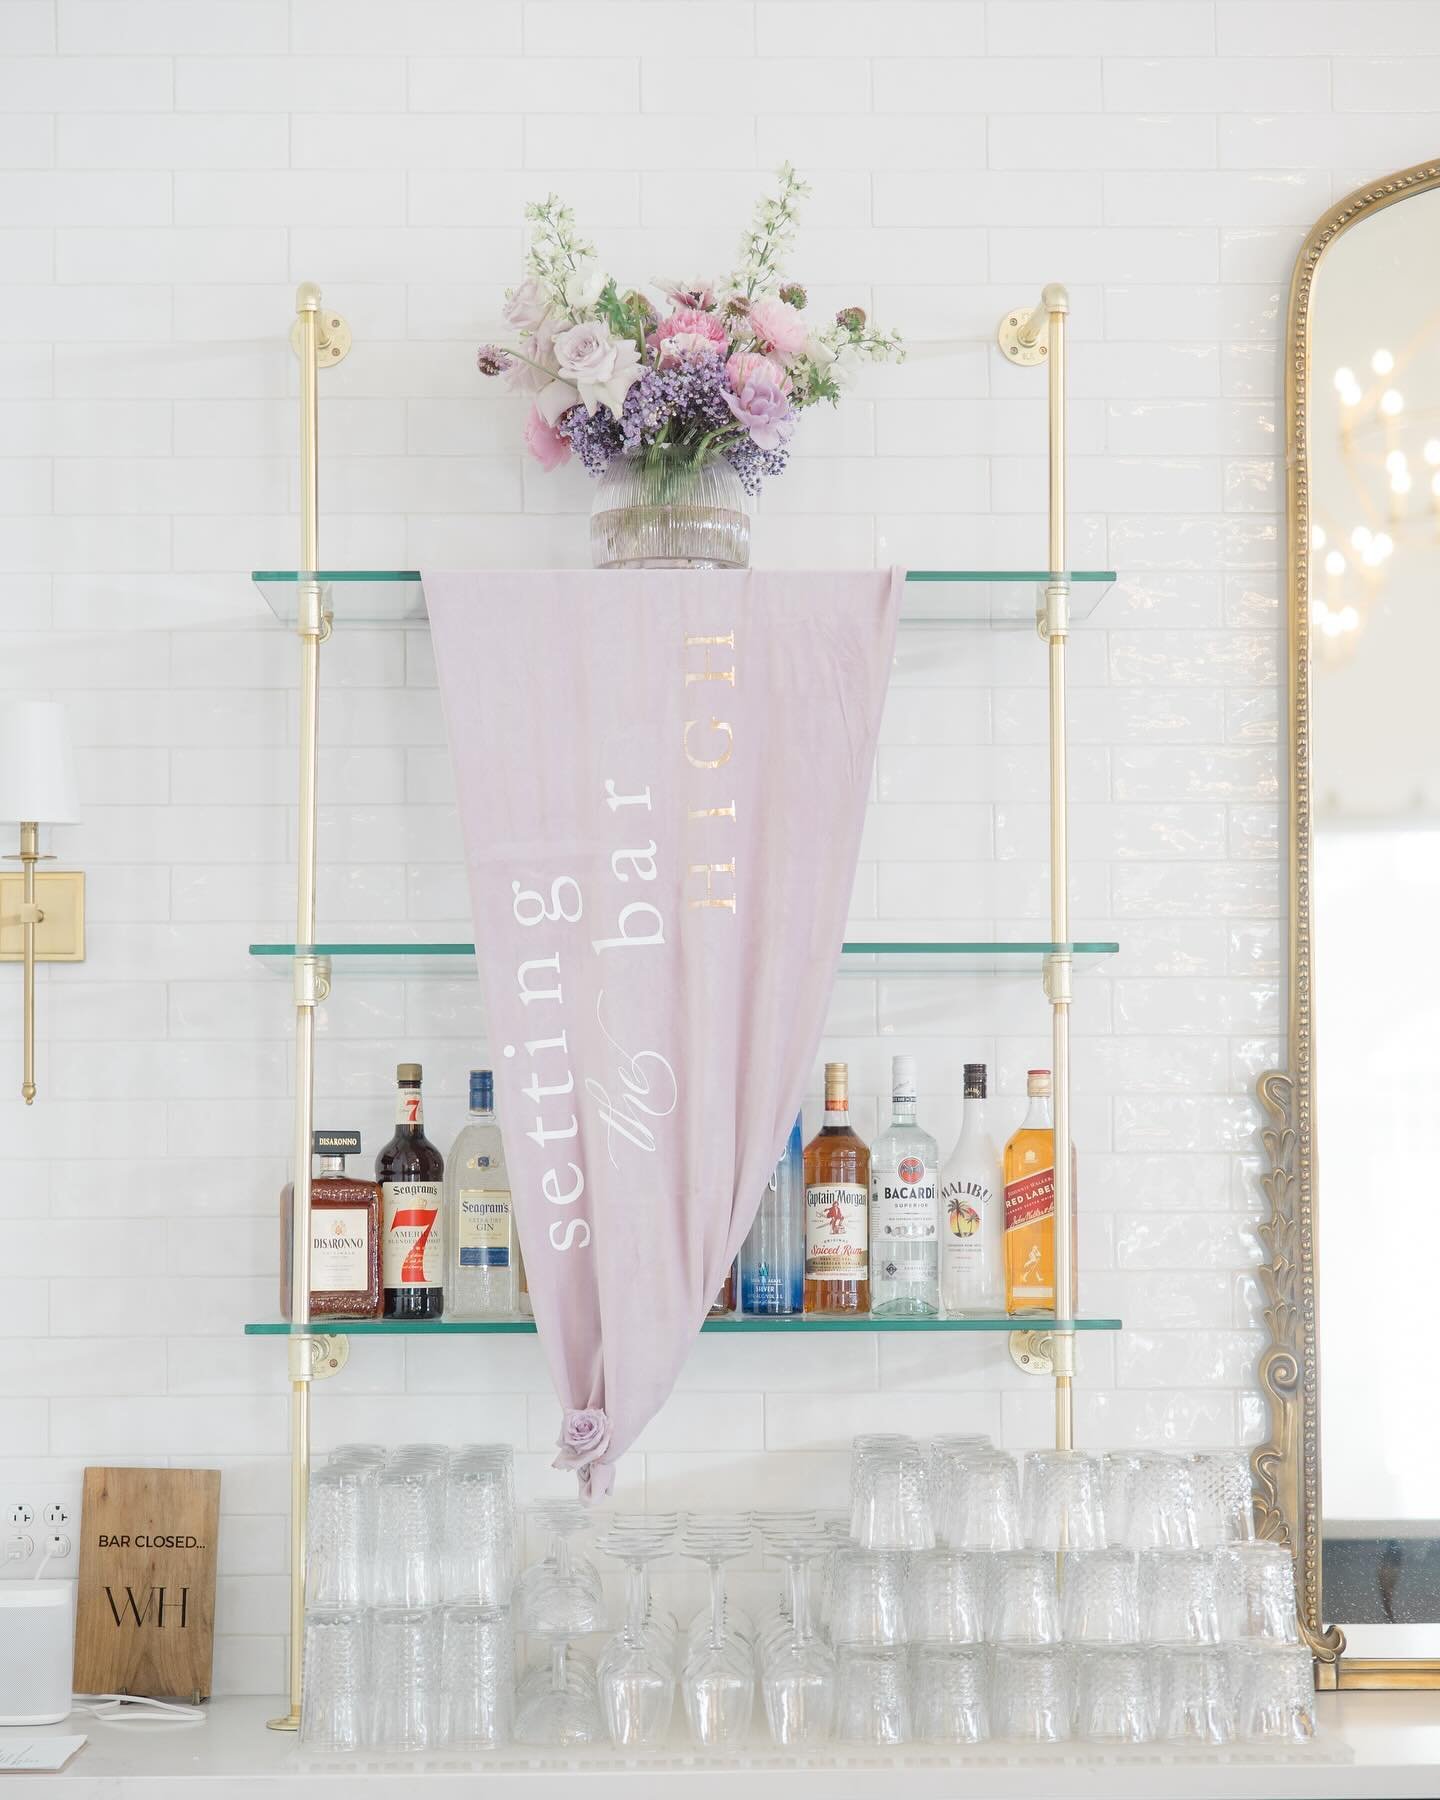 Setting the bar high for each and every event (pun intended!). 🥂

Venue: @westwind_hills 
Photographer: @erikarenephotography 

#stlouiswedding #missouriweddings #missouribrides #stlouisweddingvenues #missouriweddingvenues #cocktailhour #weddingcock